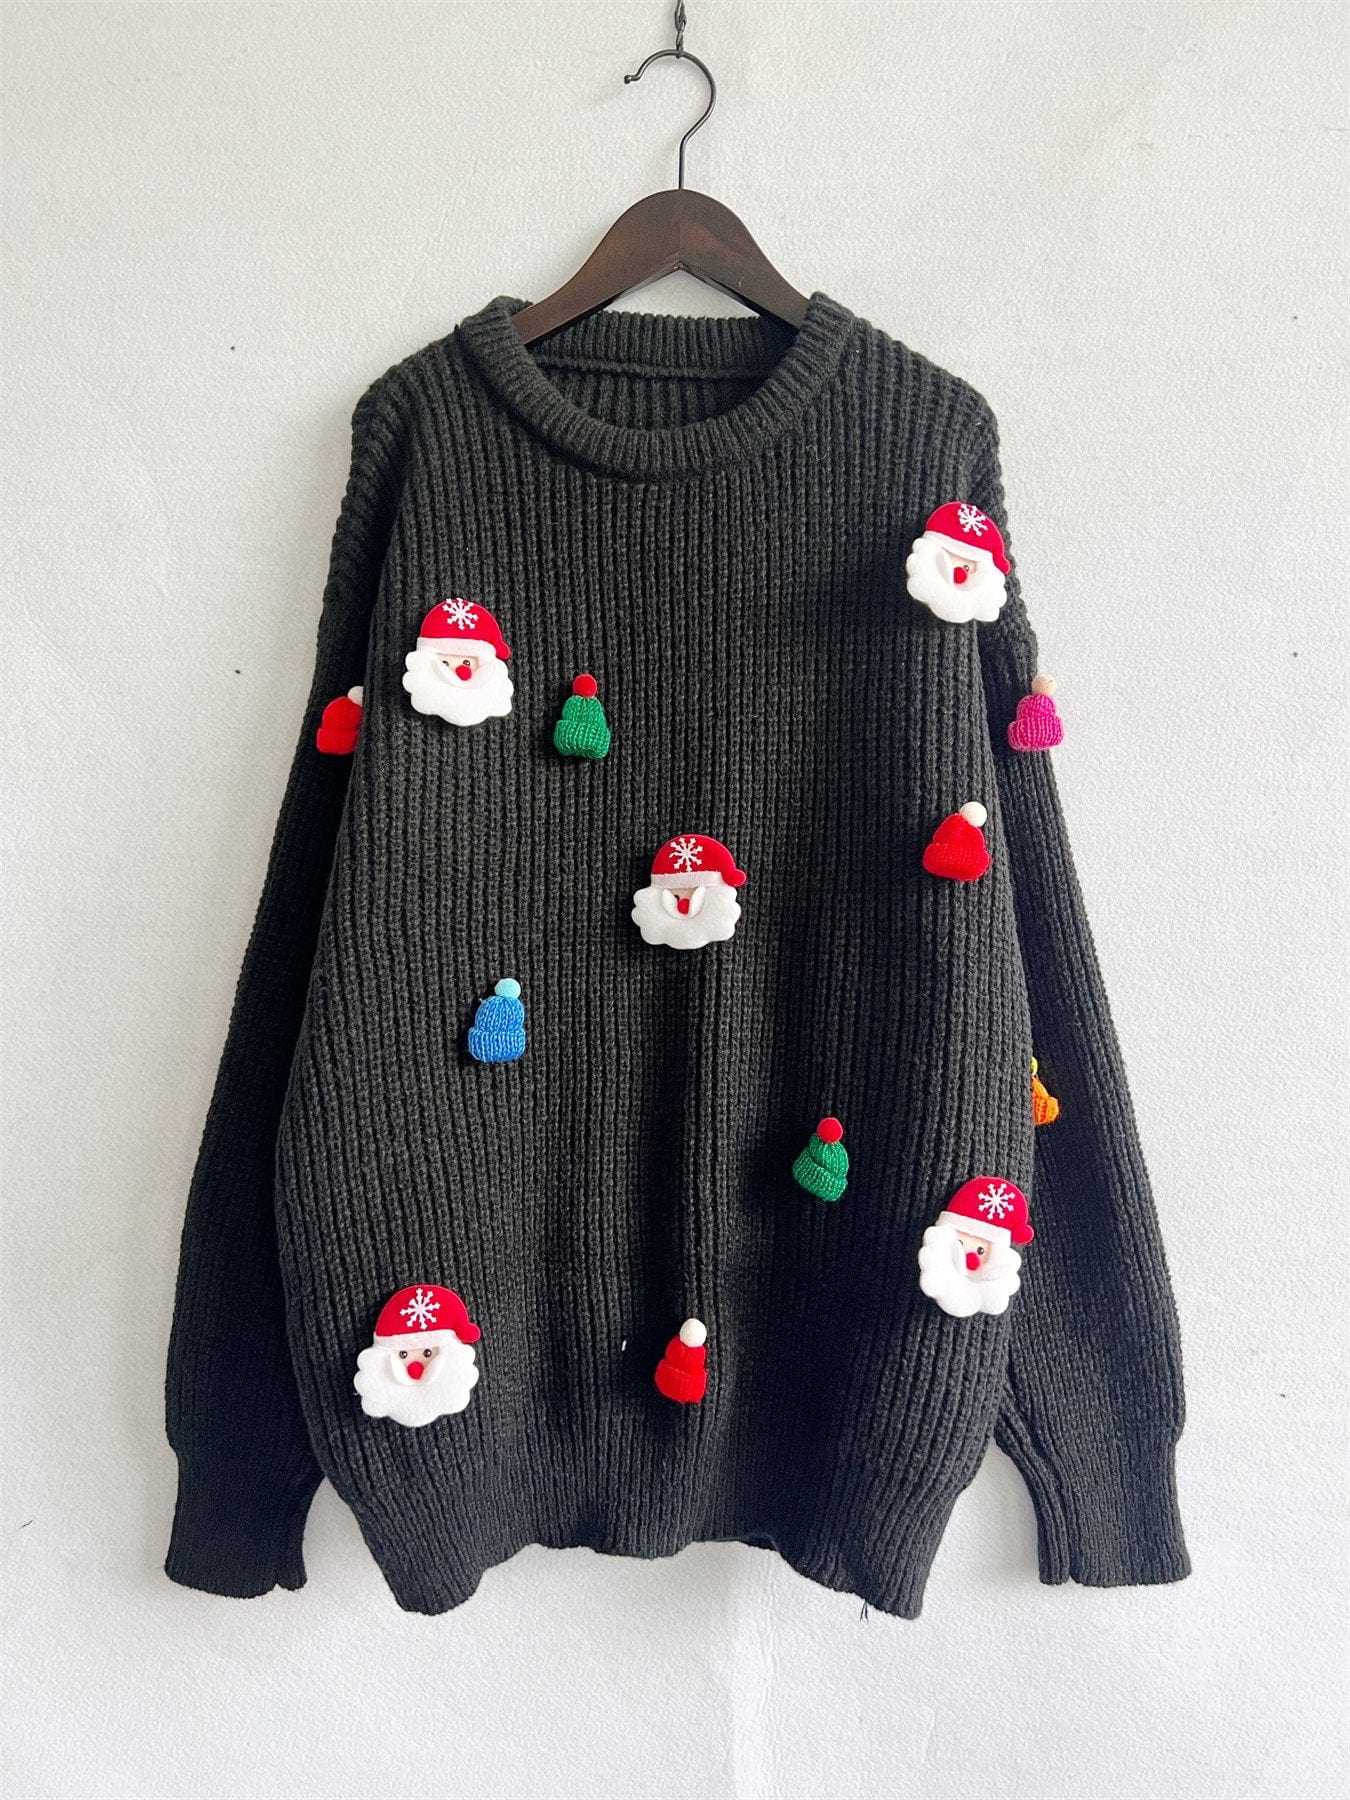 wickedafstore Embroidered Santa Pullover Sweater